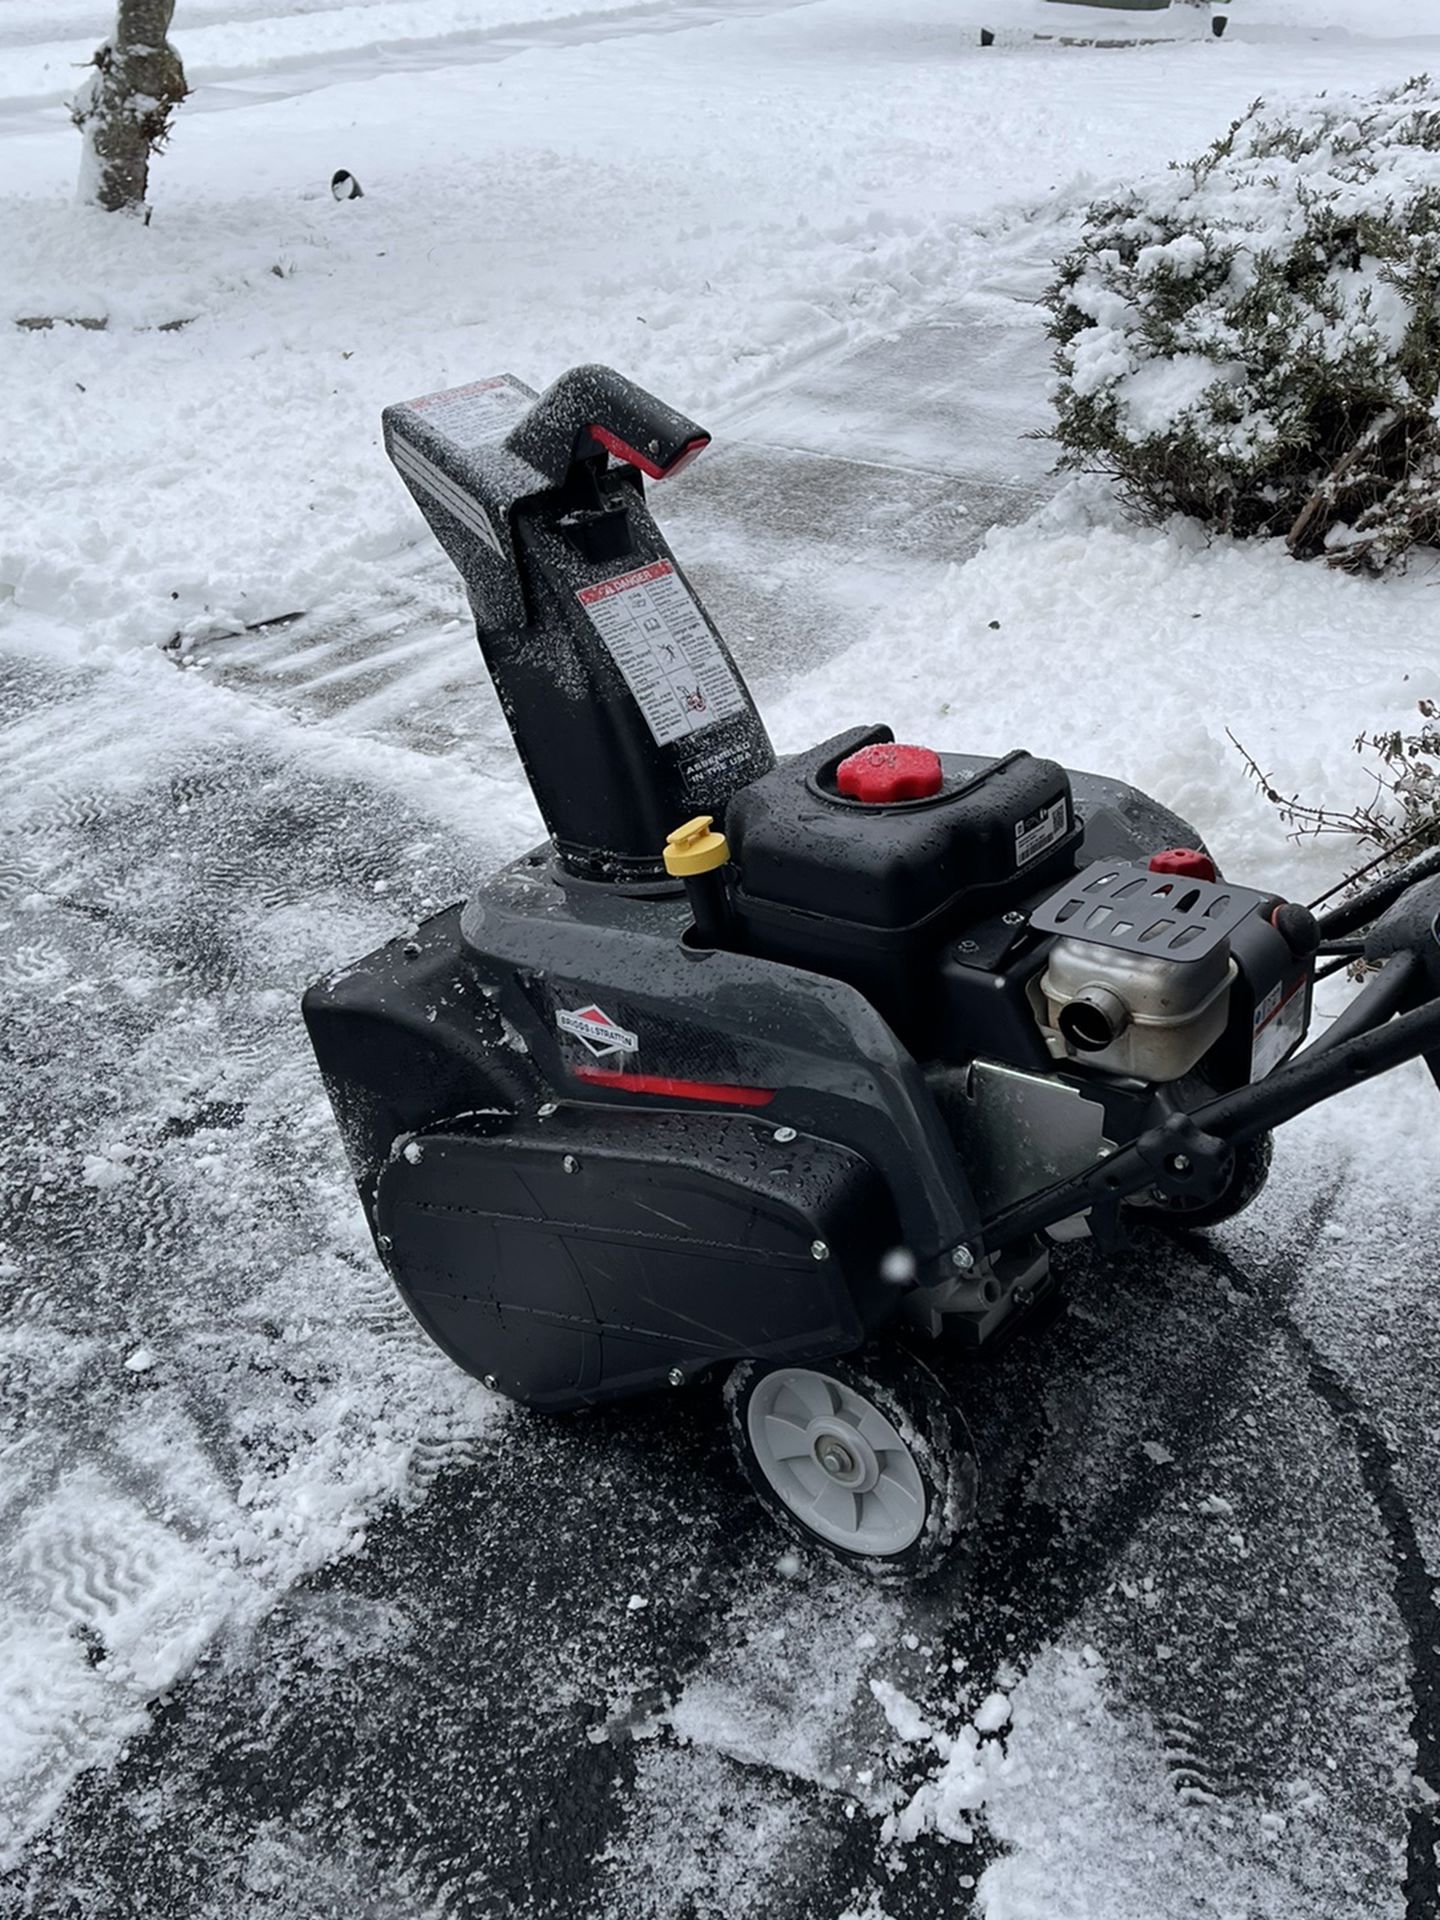 Snow blower 22” Like New Use Few Times